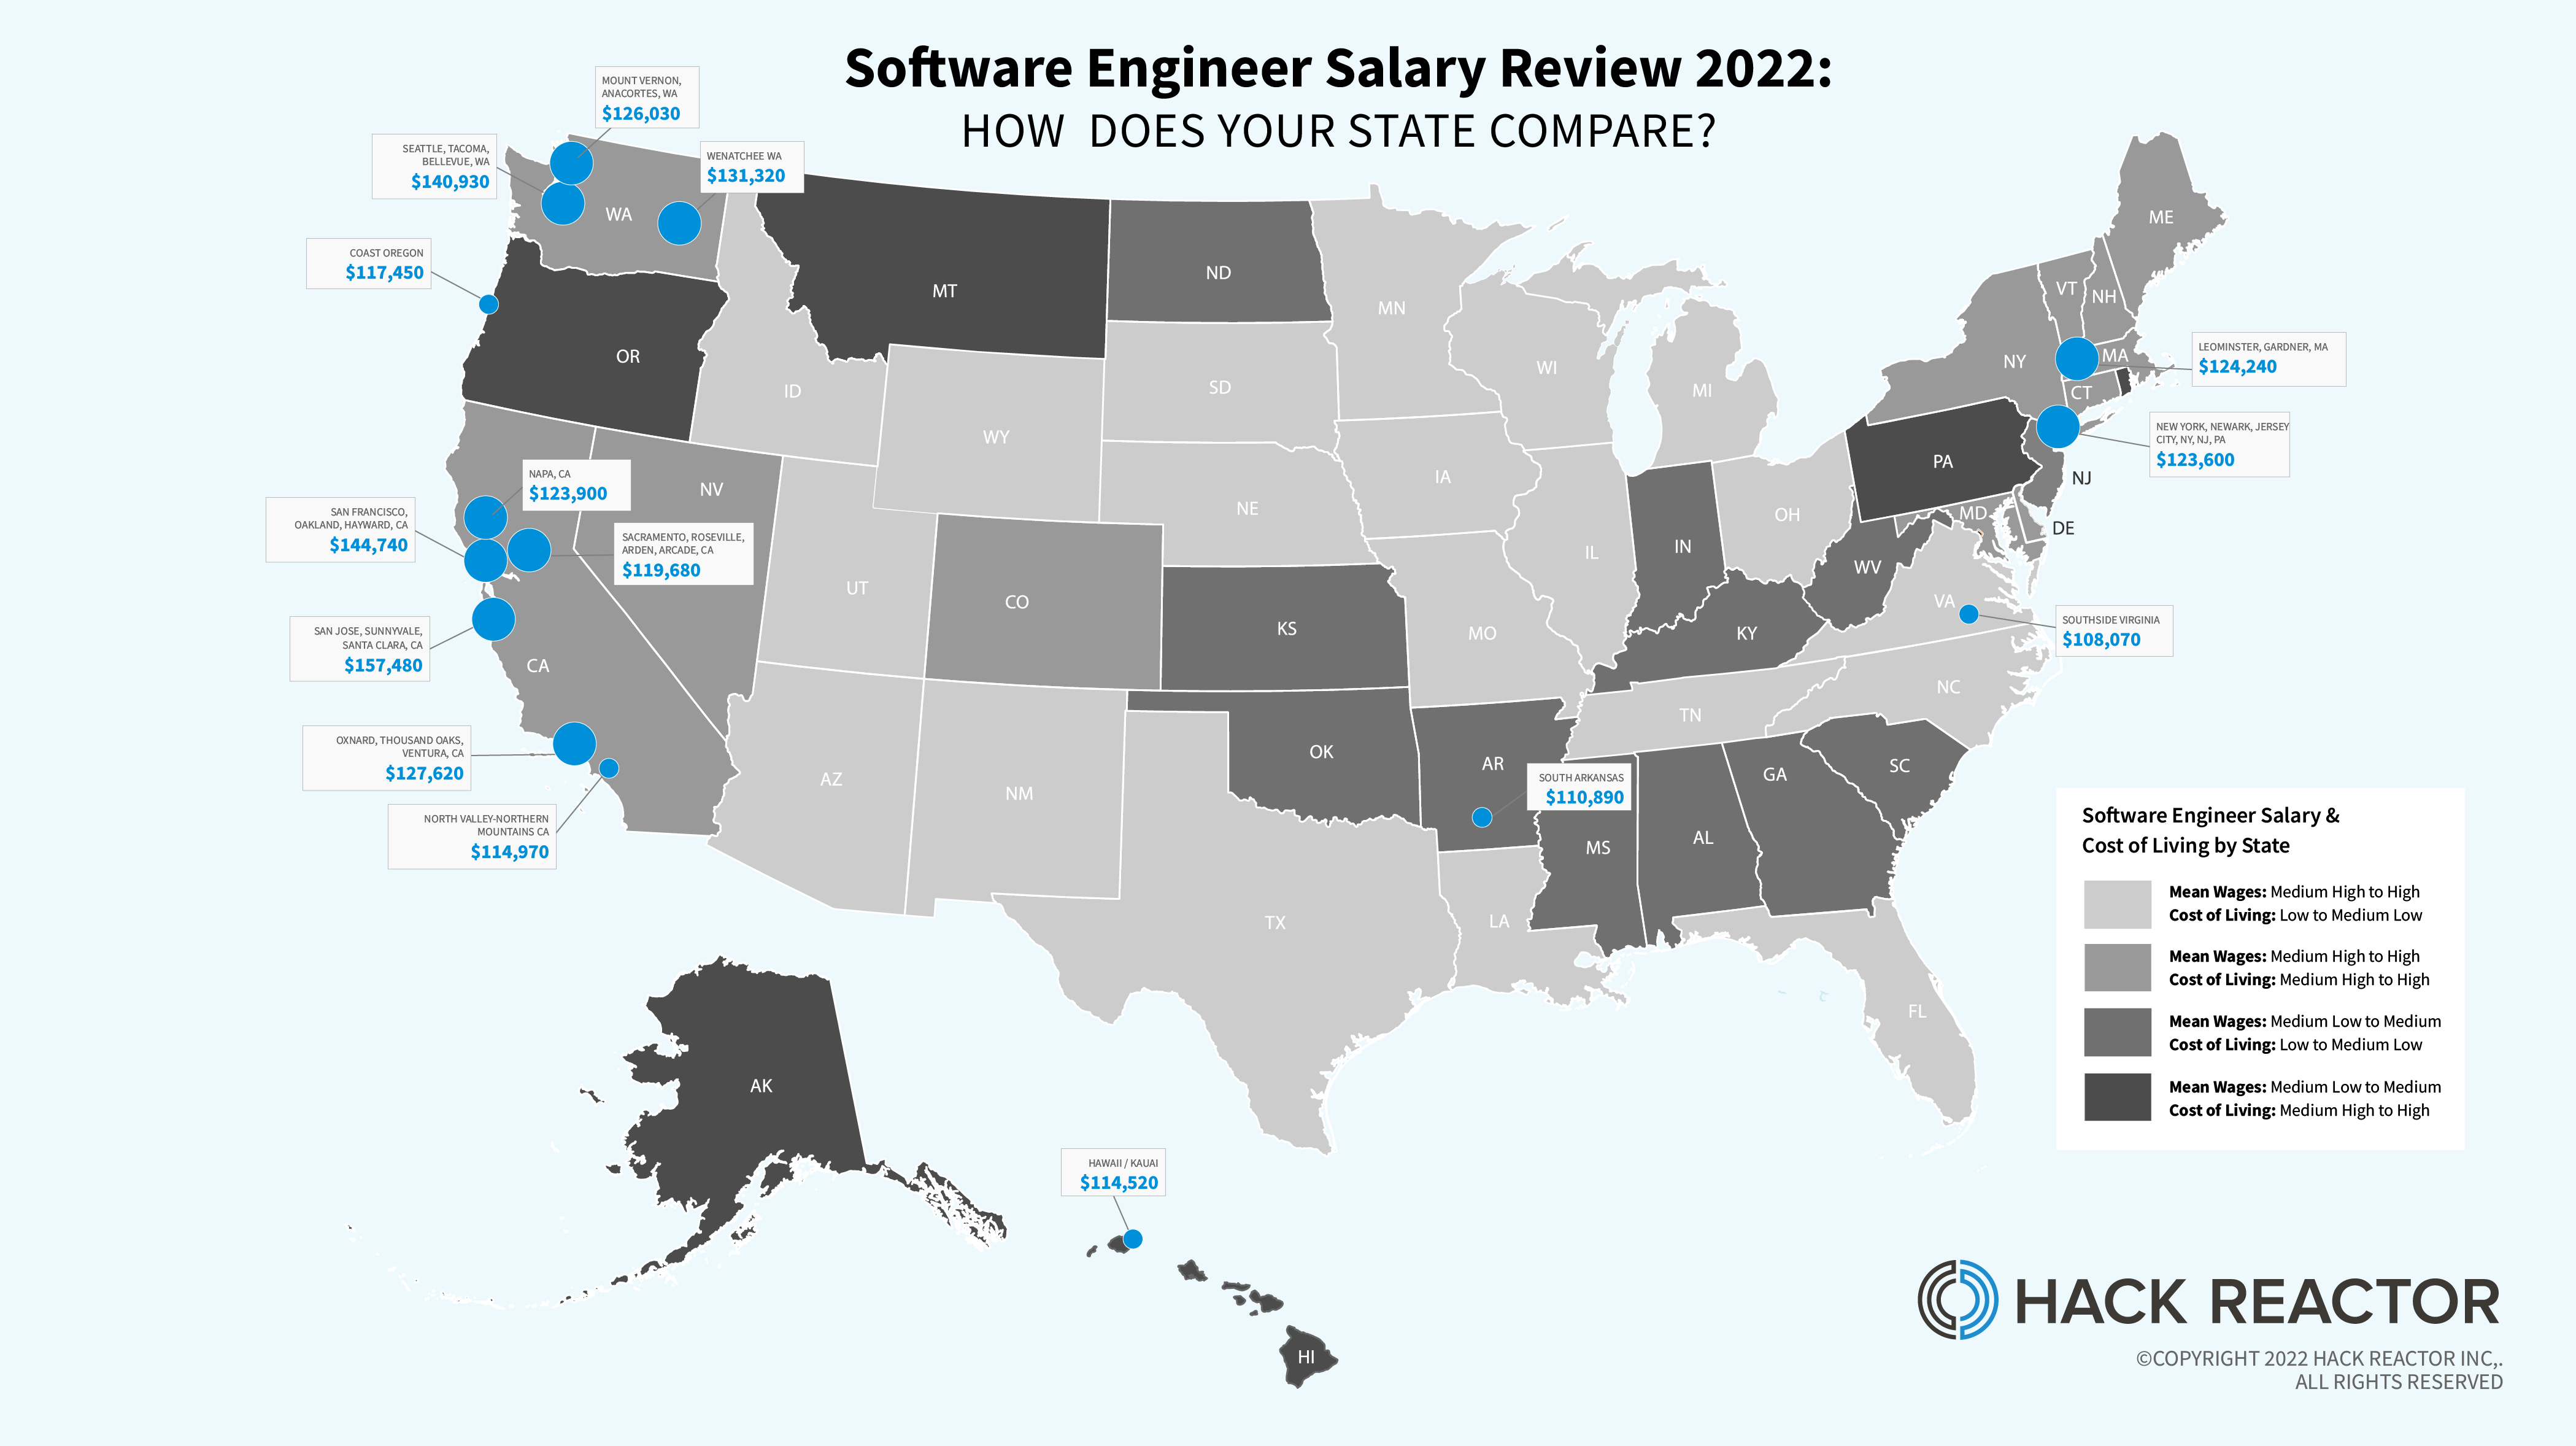 Software Engineer Salary Review 2022 Map